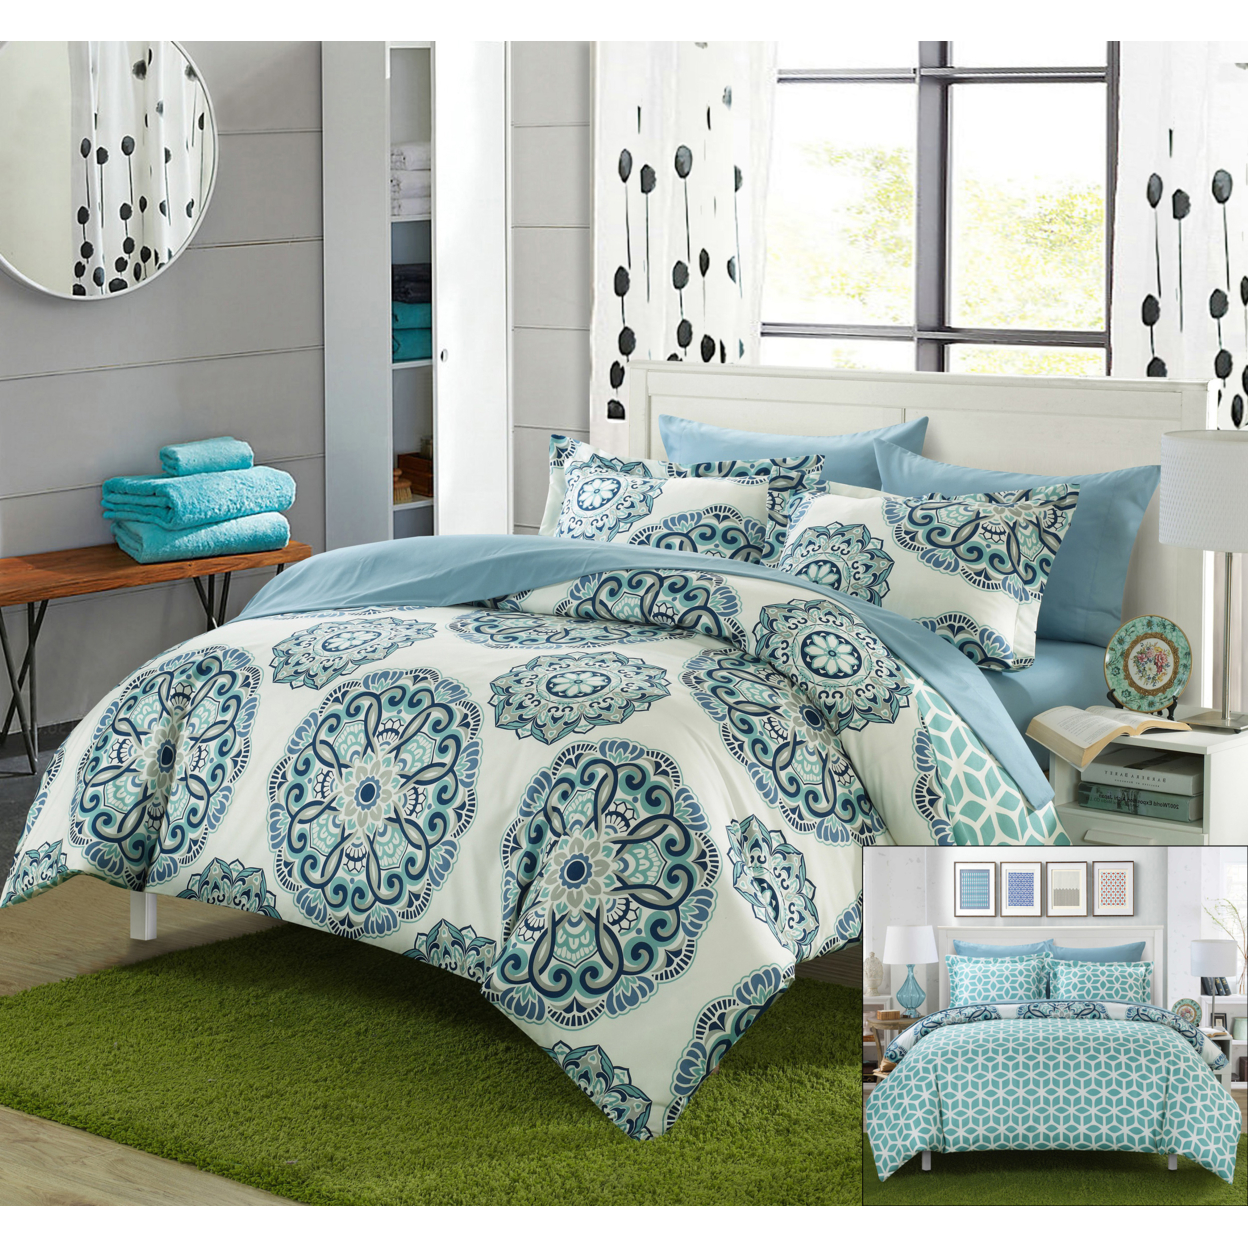 2/3 Piece Majorca Super Soft Microfiber Large Printed Medallion REVERSIBLE With Geometric Printed Backing Duvet Set - Green, Full/Queen